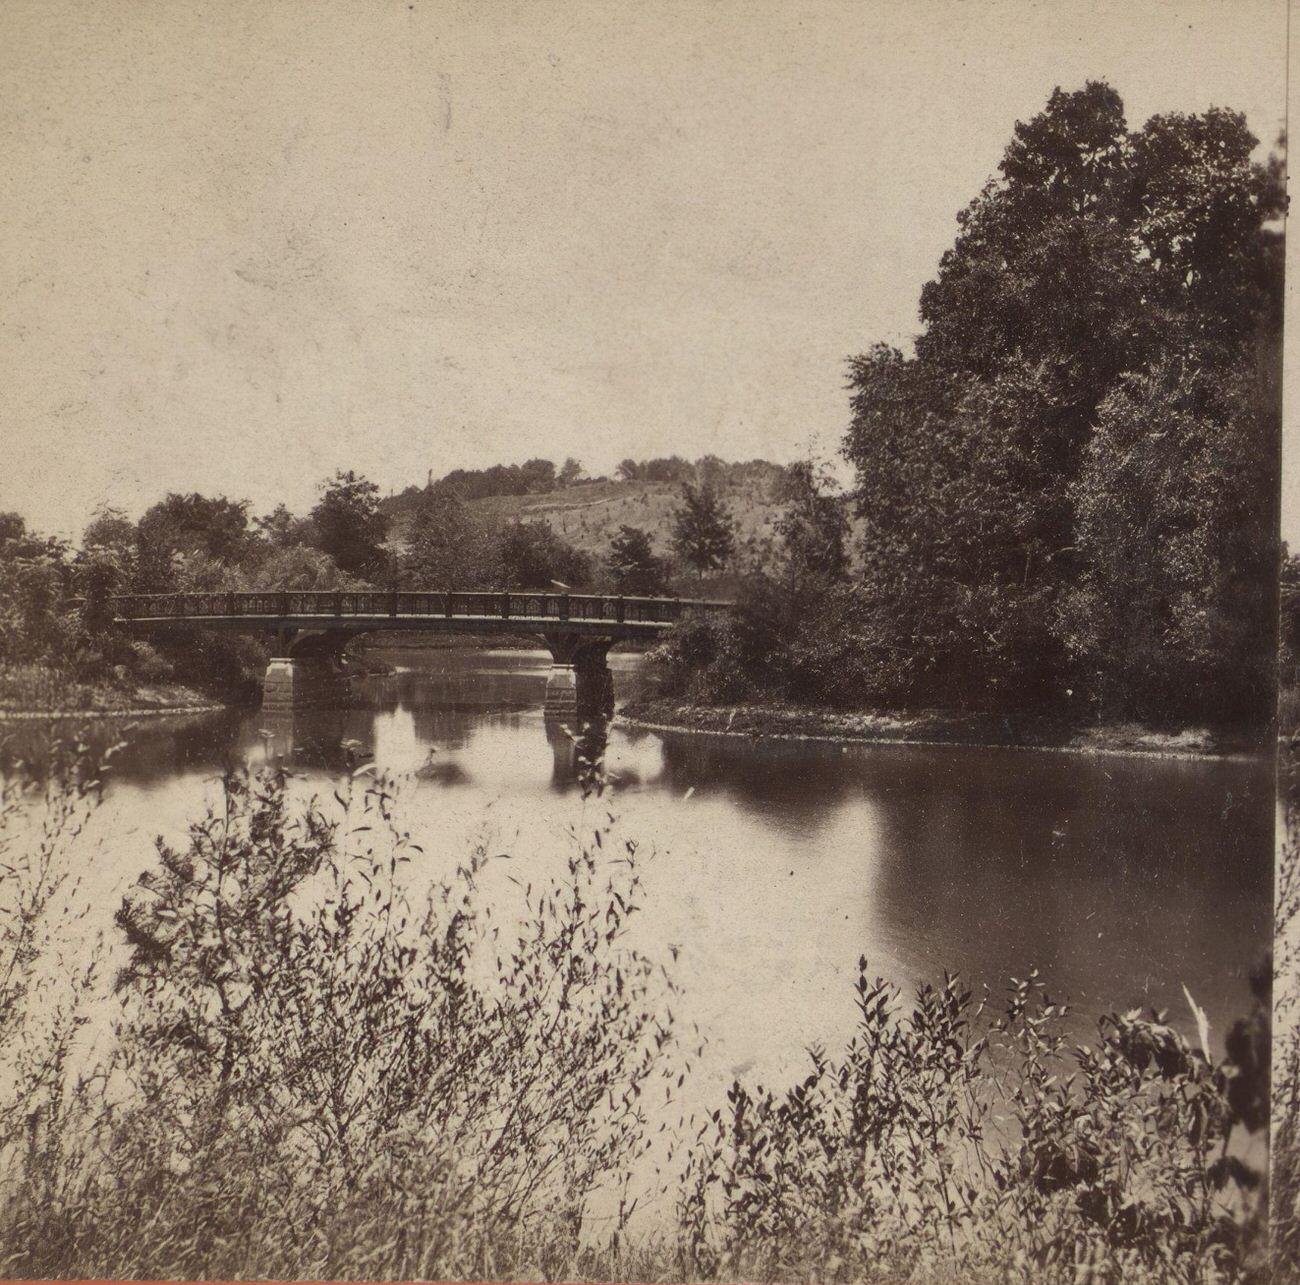 View Looking South From Lullwater Bridge In Prospect Park, Brooklyn, 1860S